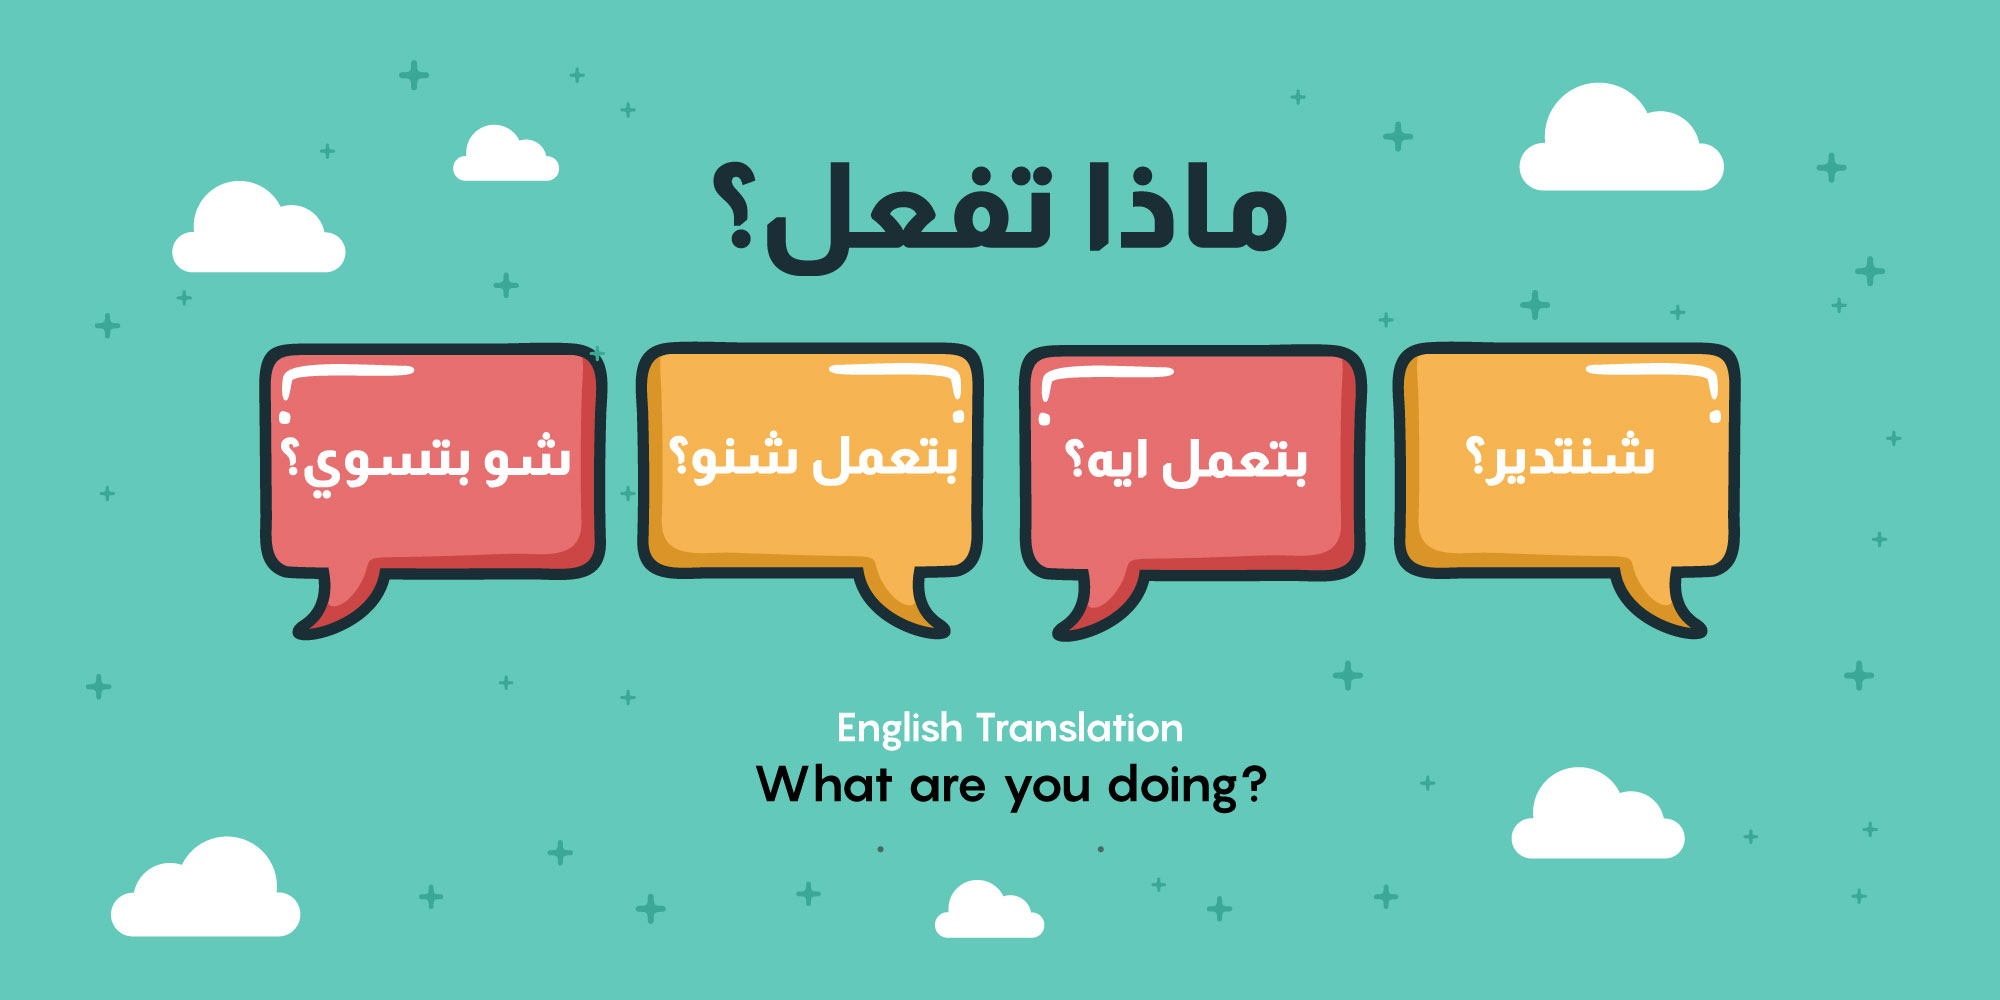 Arabic Dialects: Different Types of Arabic Language